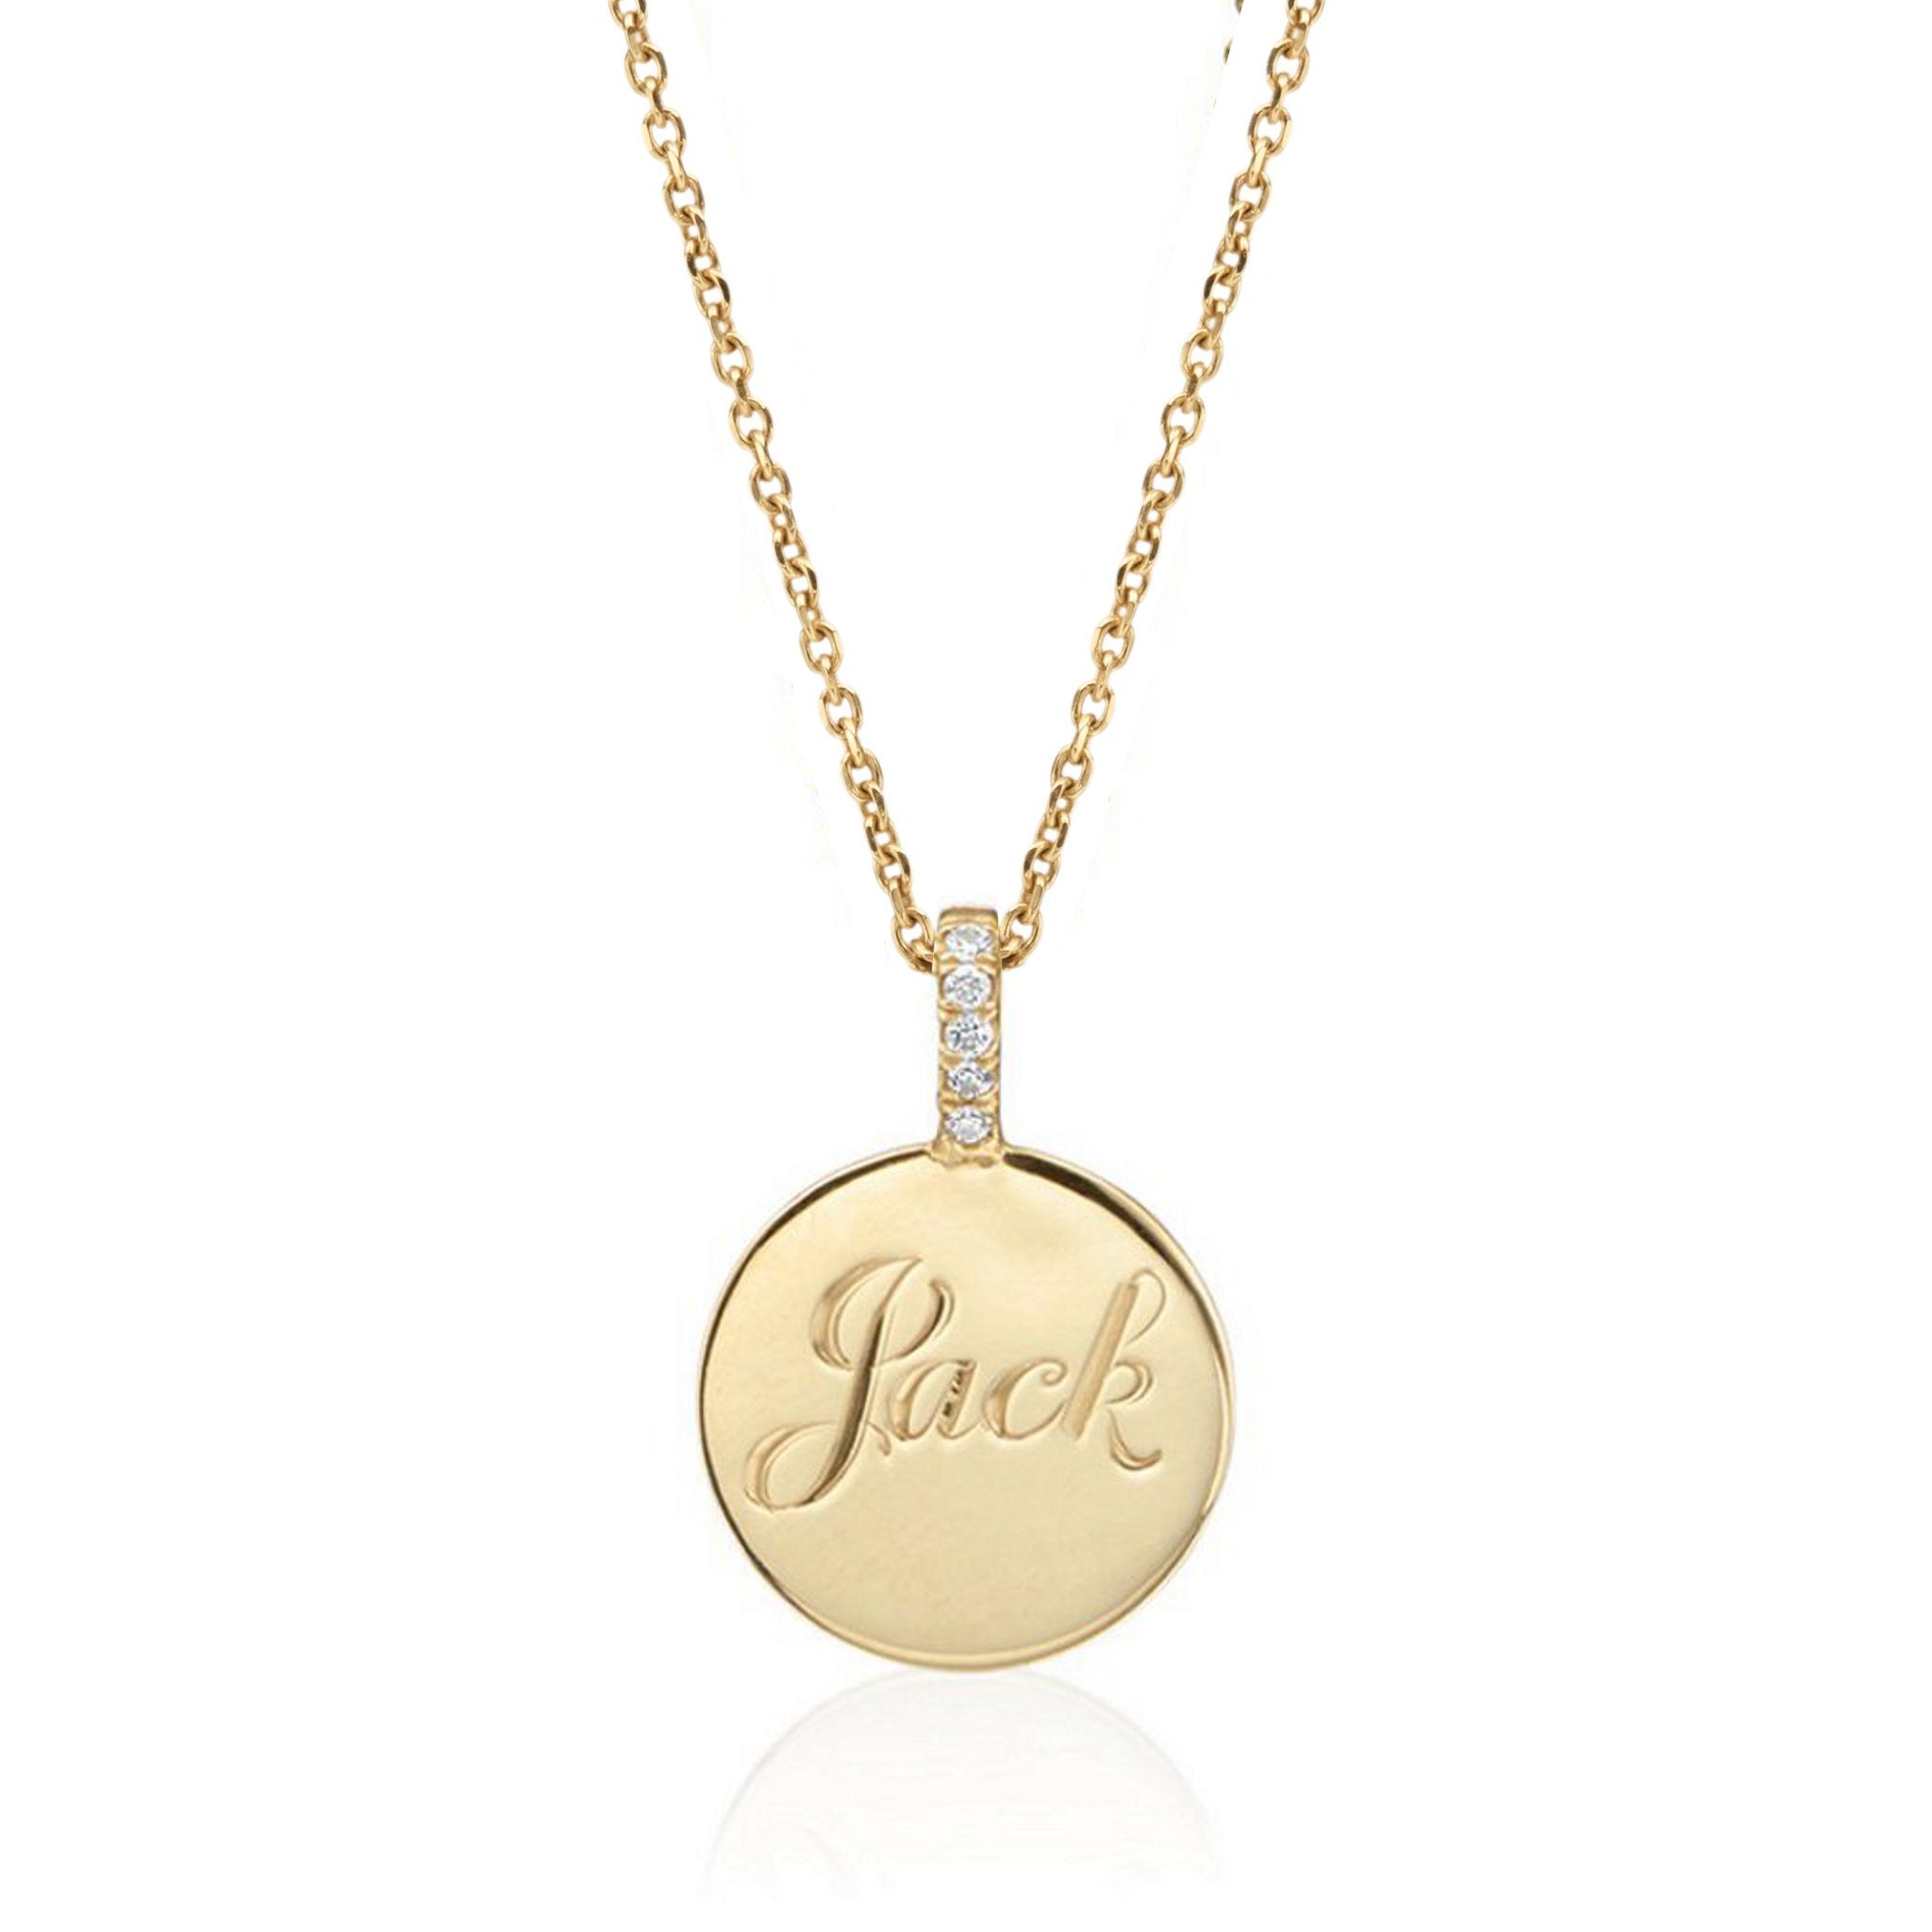 Personalized Gold Disc Pendant with Diamonds